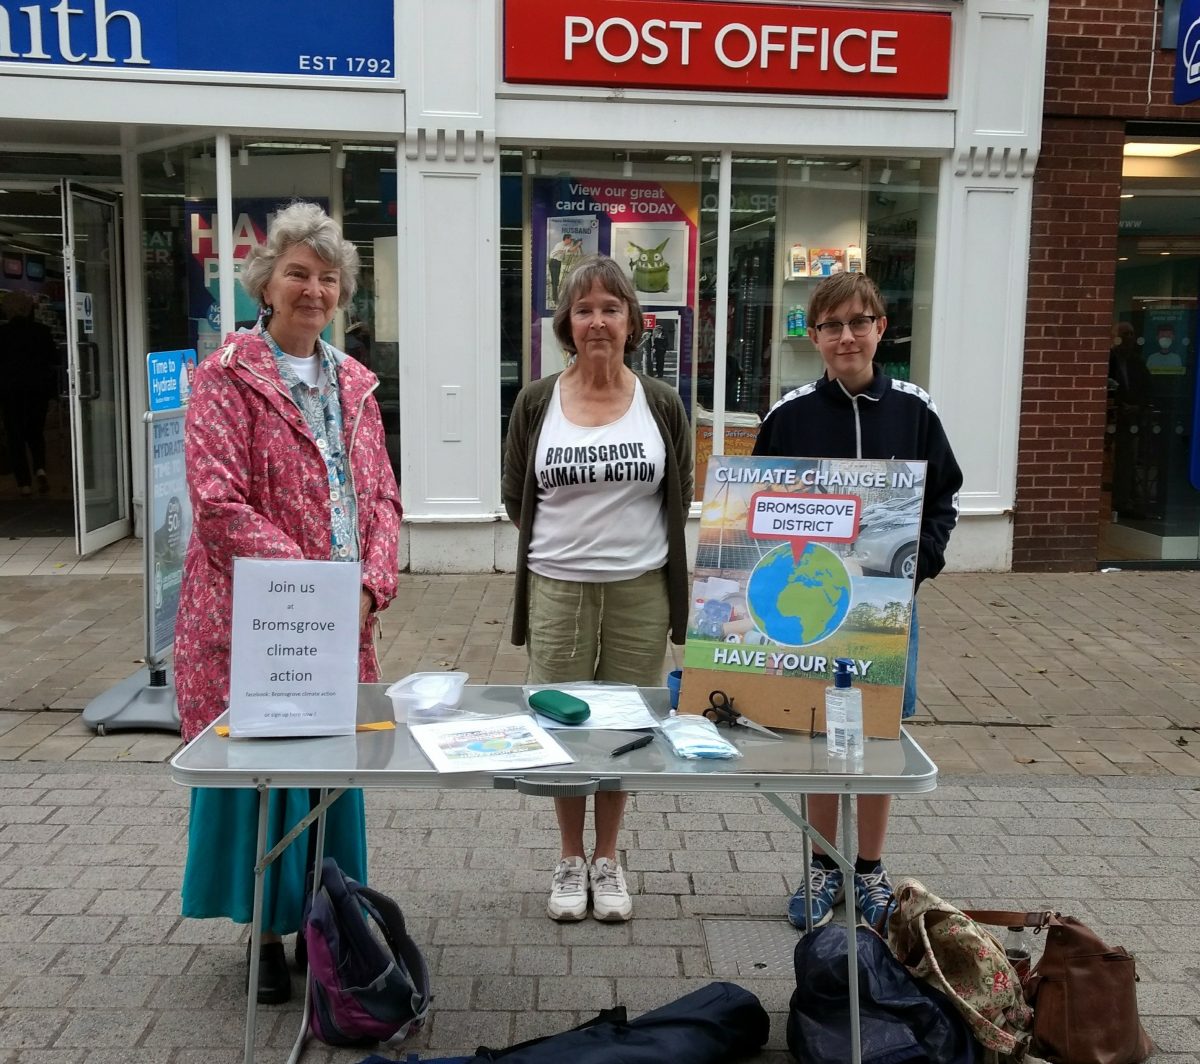 Bromsgrove Climate Action to highlight global warming issues at latest outing - Bromsgrove Standard